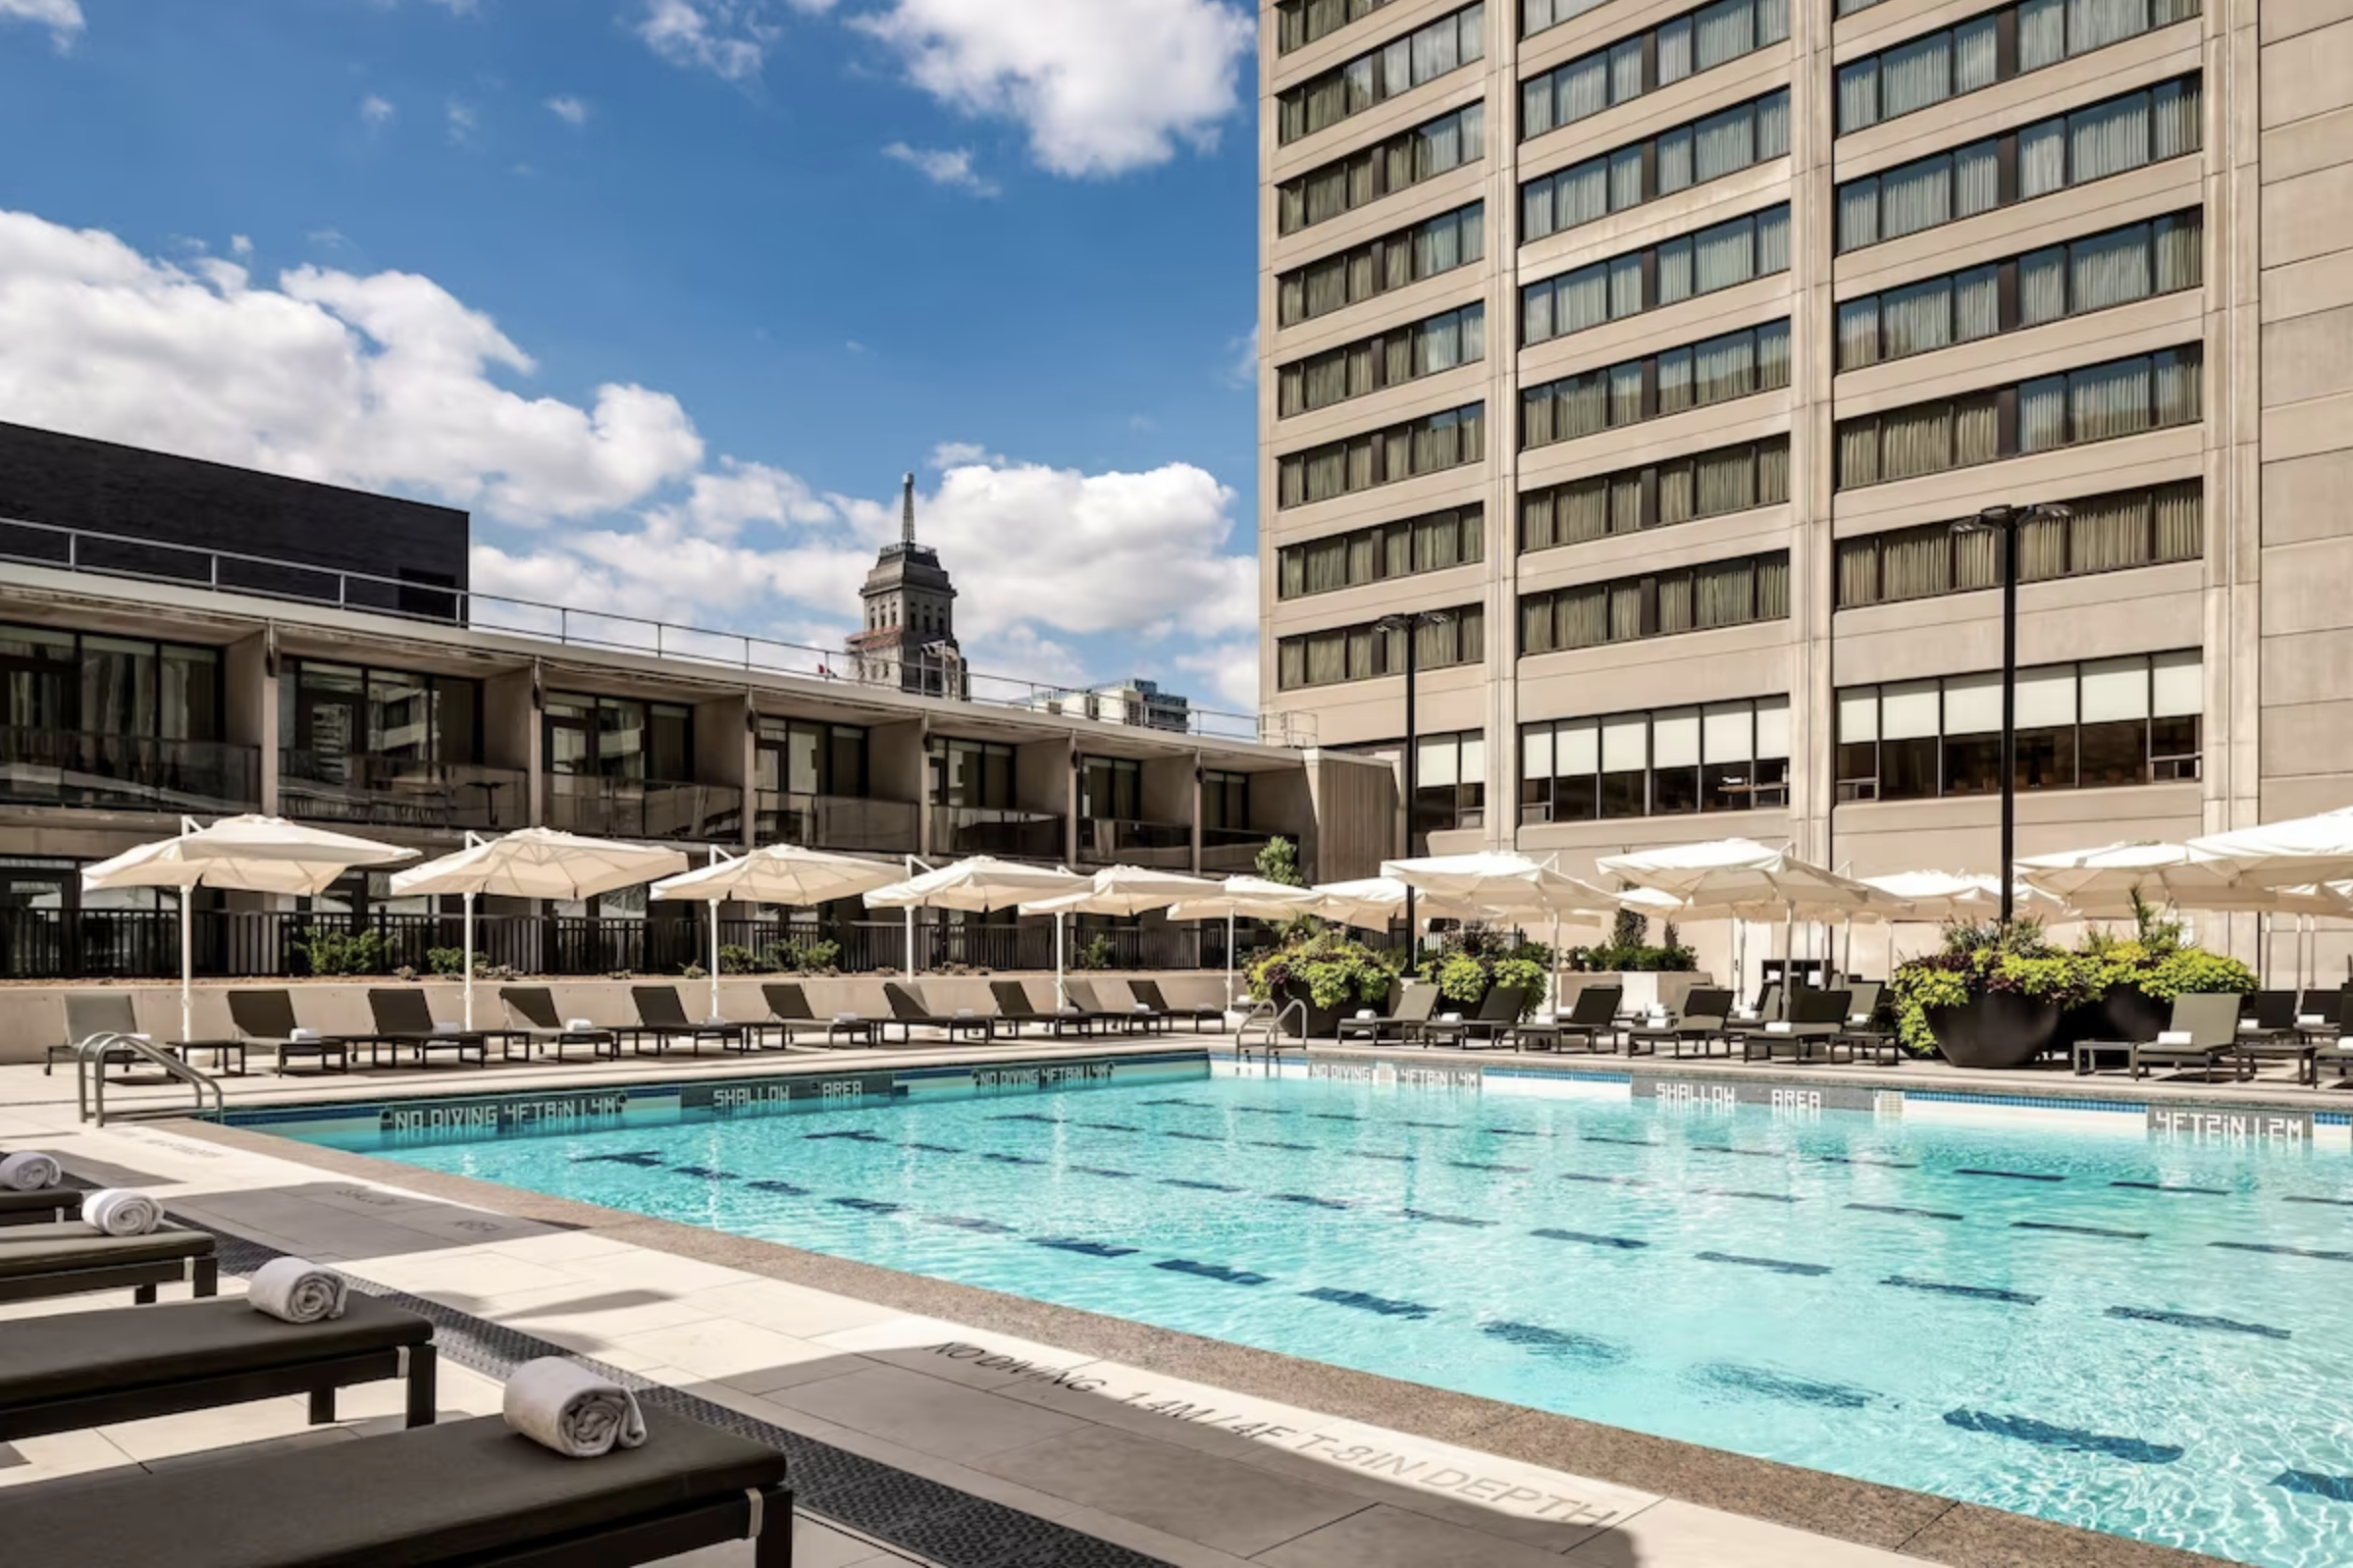 5. Sheraton Centre Toronto Hotel - Best Hotels in Toronto with Rooftop Pools